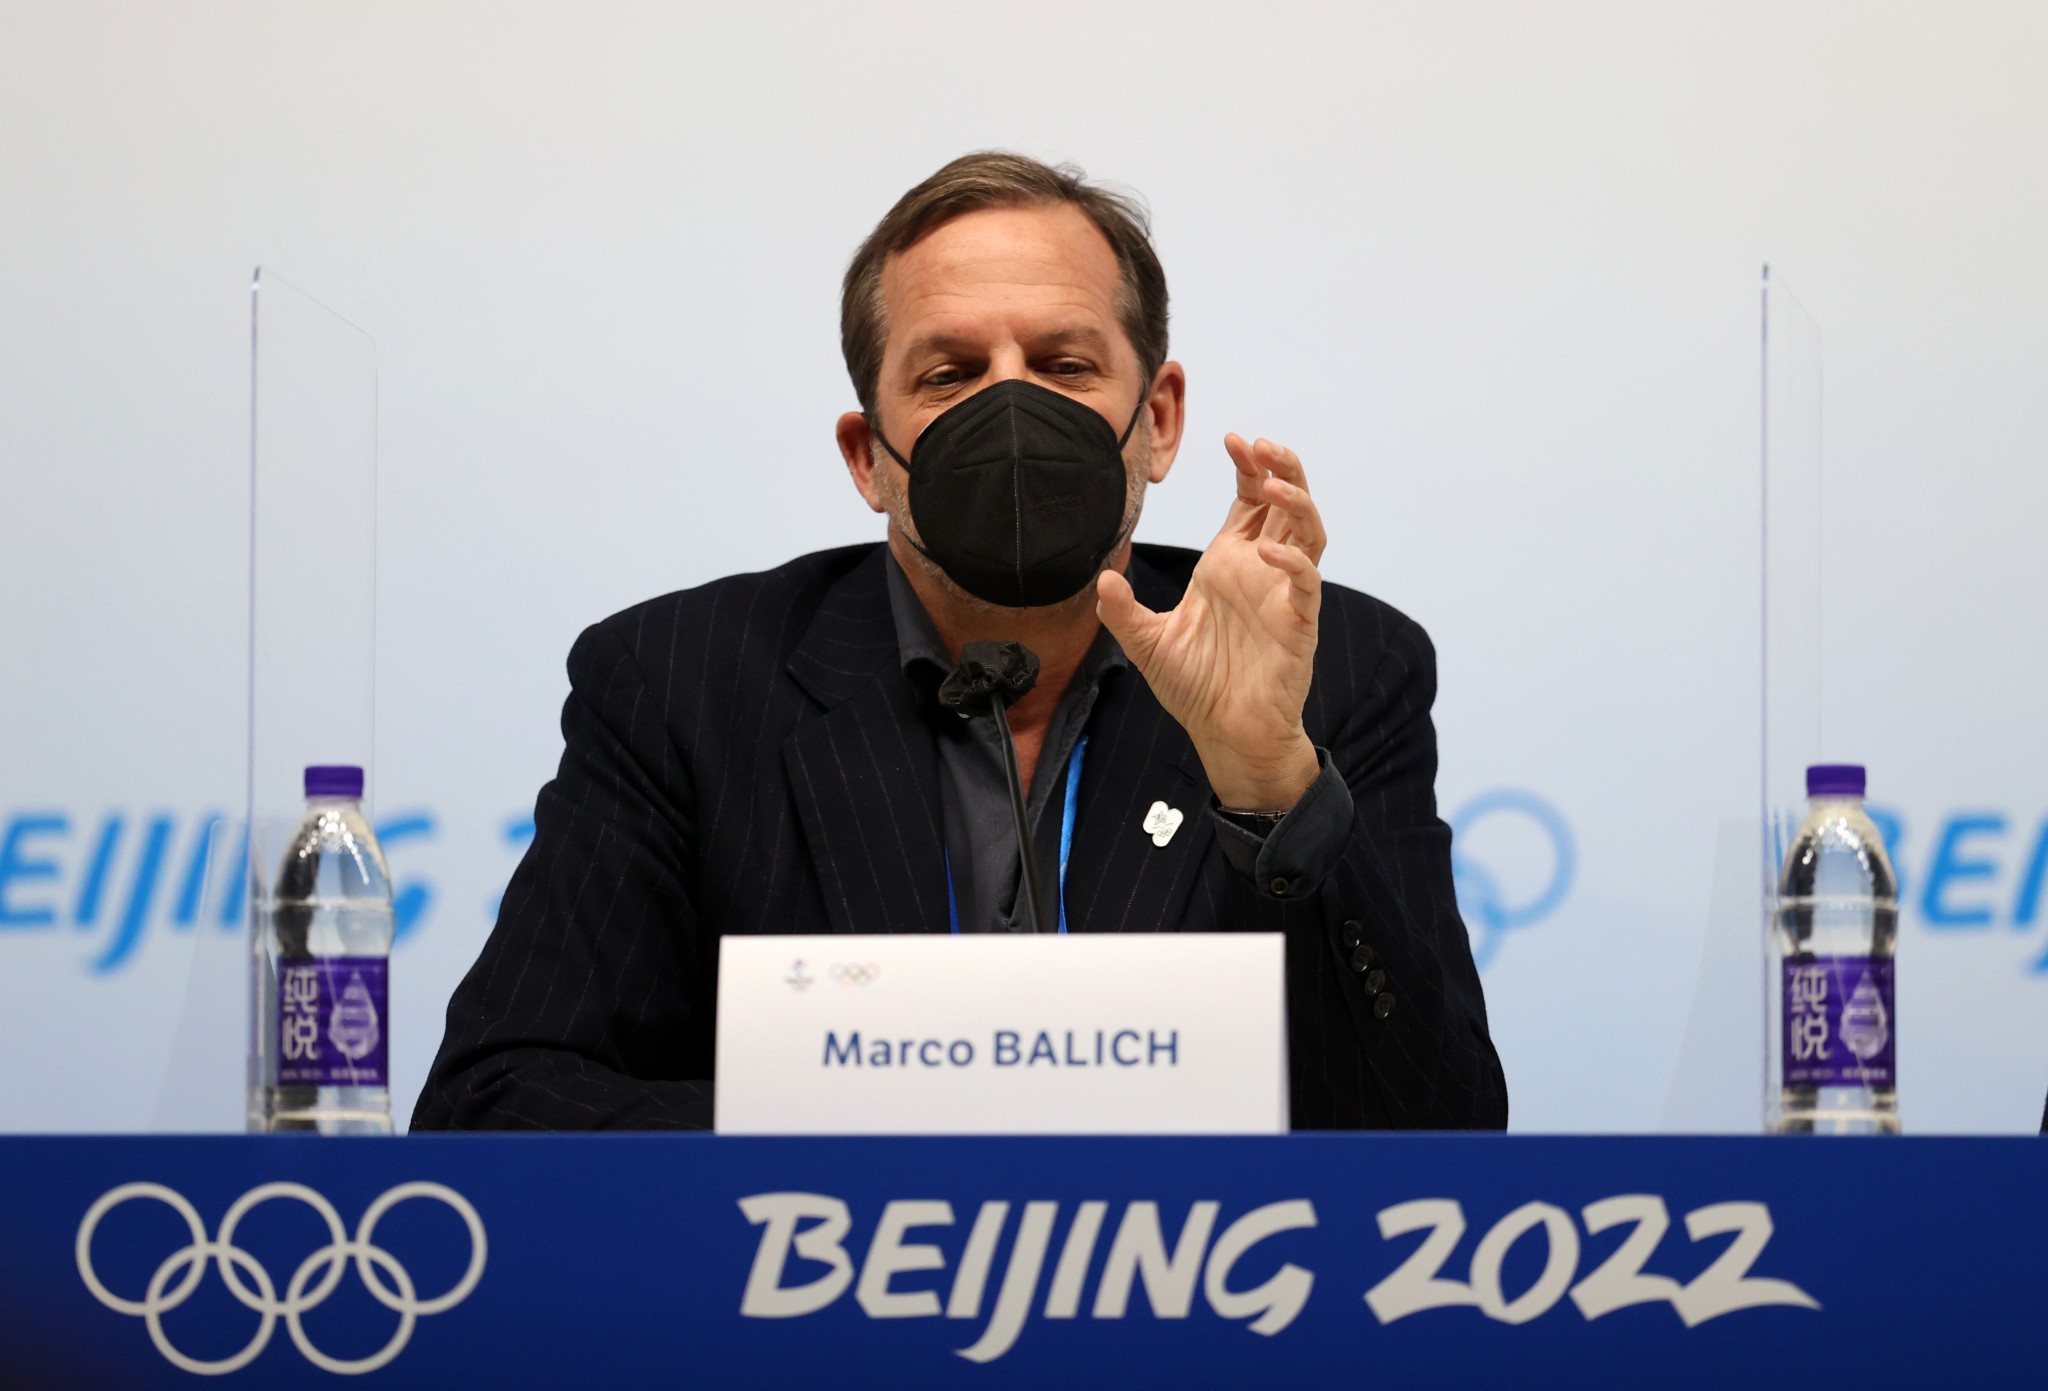 Marco Balich, creative producer of Olympic Ceremonies for Milan Cortina 2026, gave a sneak preview of tomorrow's Handover Ceremony at a press conference at Beijing 2022 ©Getty Images